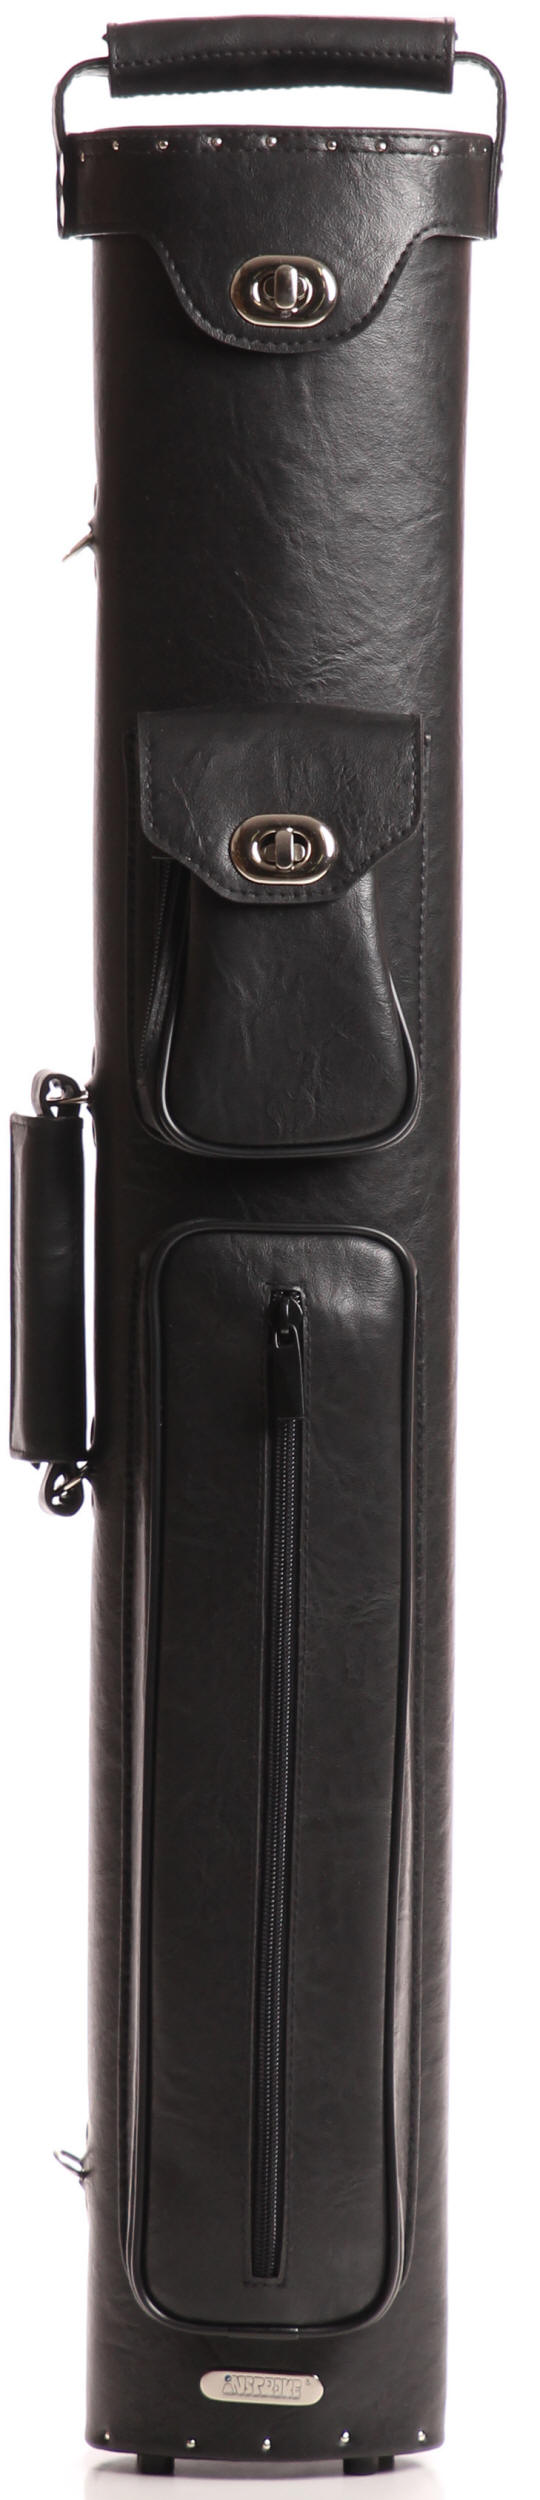 Leather Cue Case Corner Protectors to protect your expensive leather cue case. 